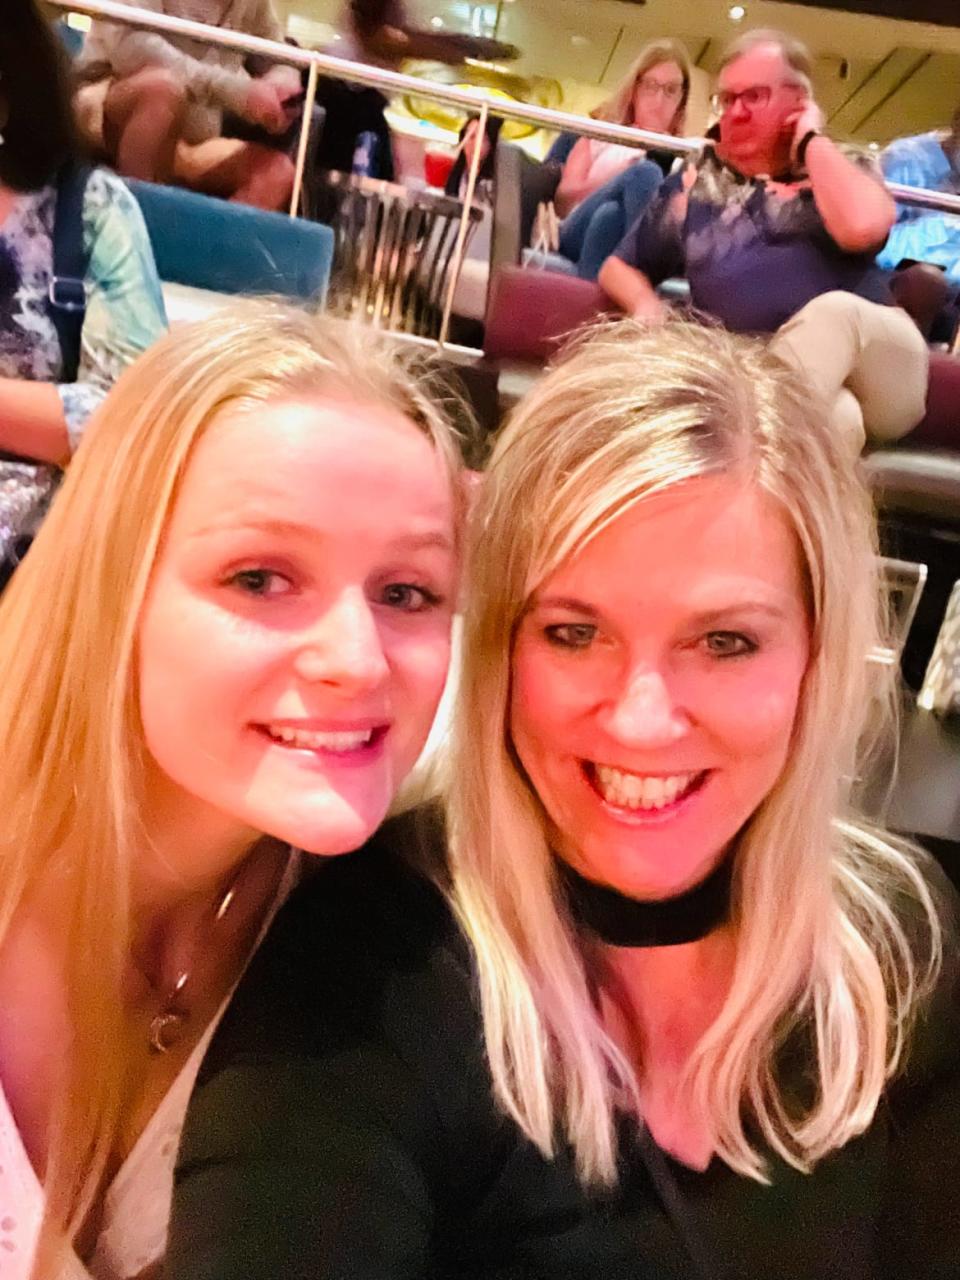 <div class="inline-image__caption"><p>McKenna Brown with her mother, Cheryl. </p></div> <div class="inline-image__credit">Courtesy of the Brown family</div>